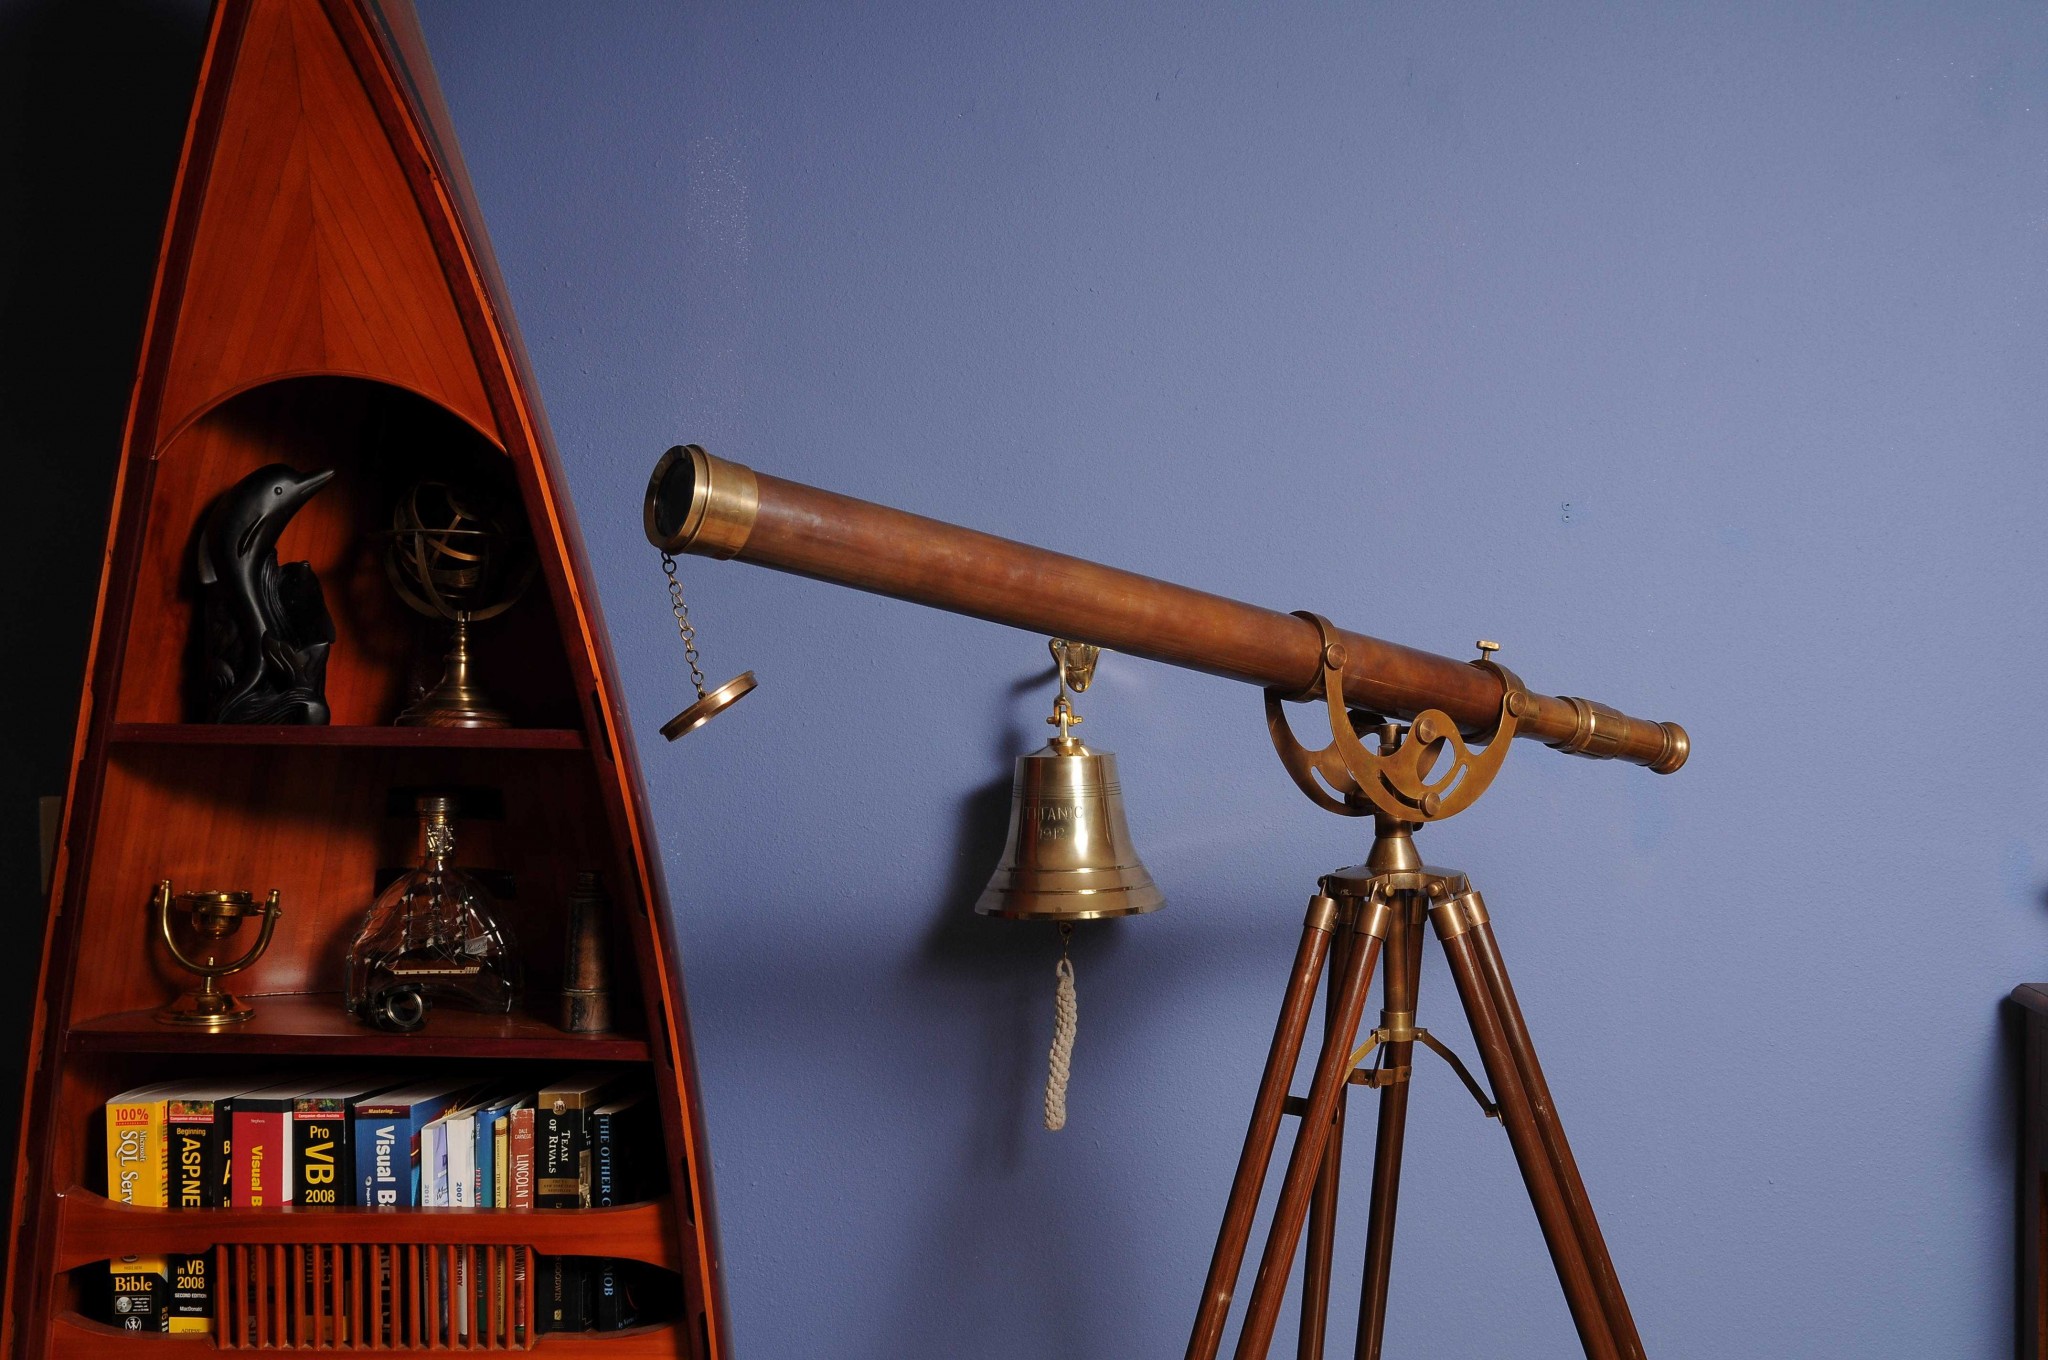 2.6" x 40" x 58" Telescope with Stand